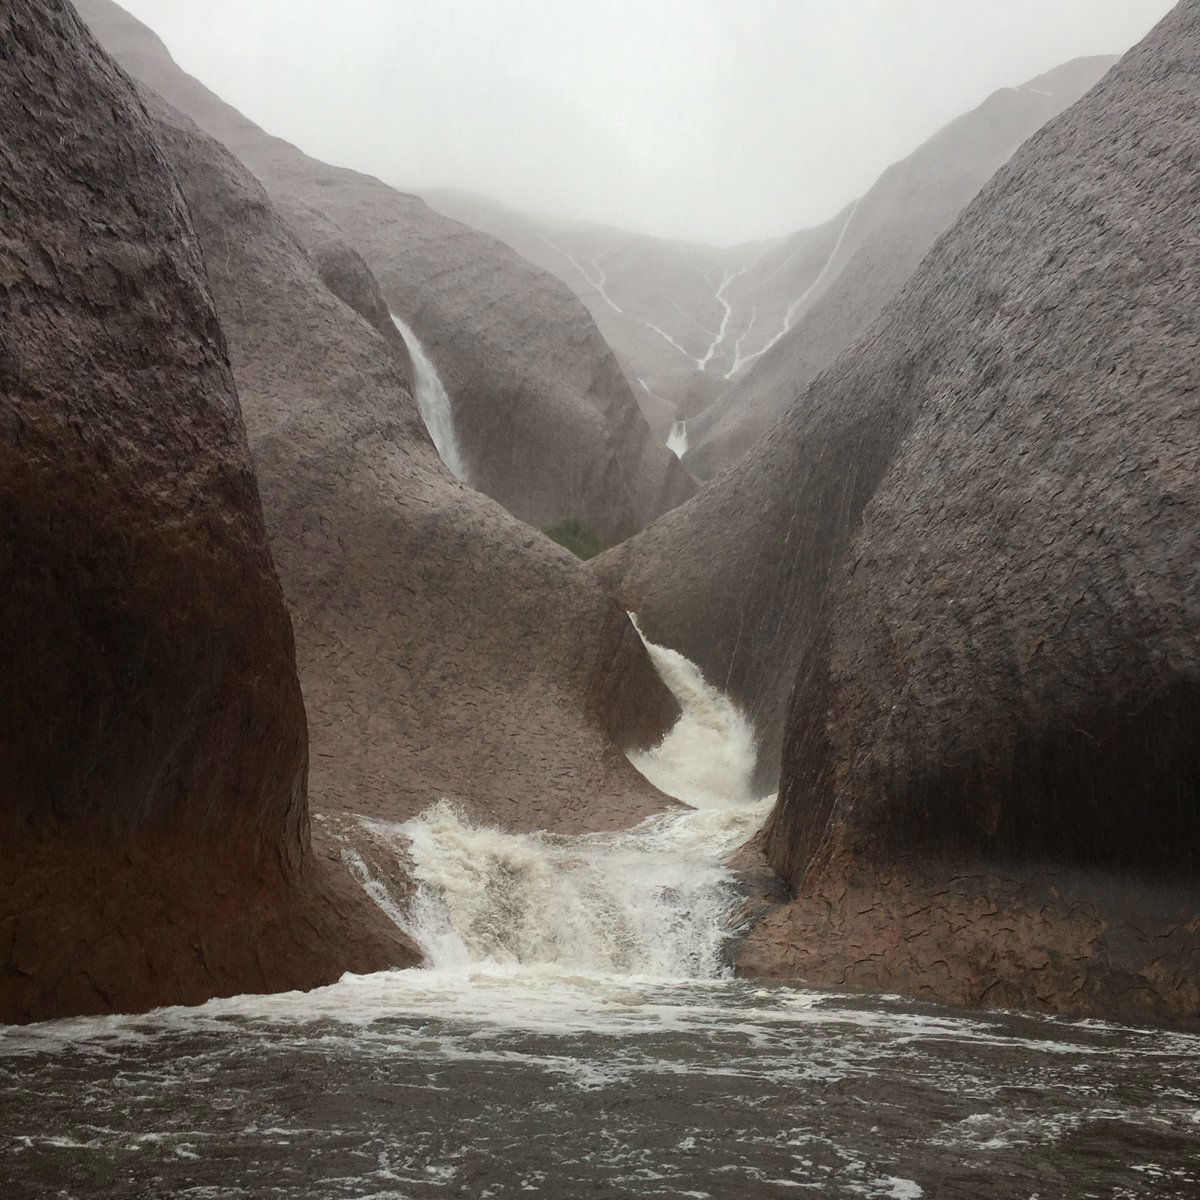 Uluru Became A Massive Waterfall After Extreme Rains Flooded The